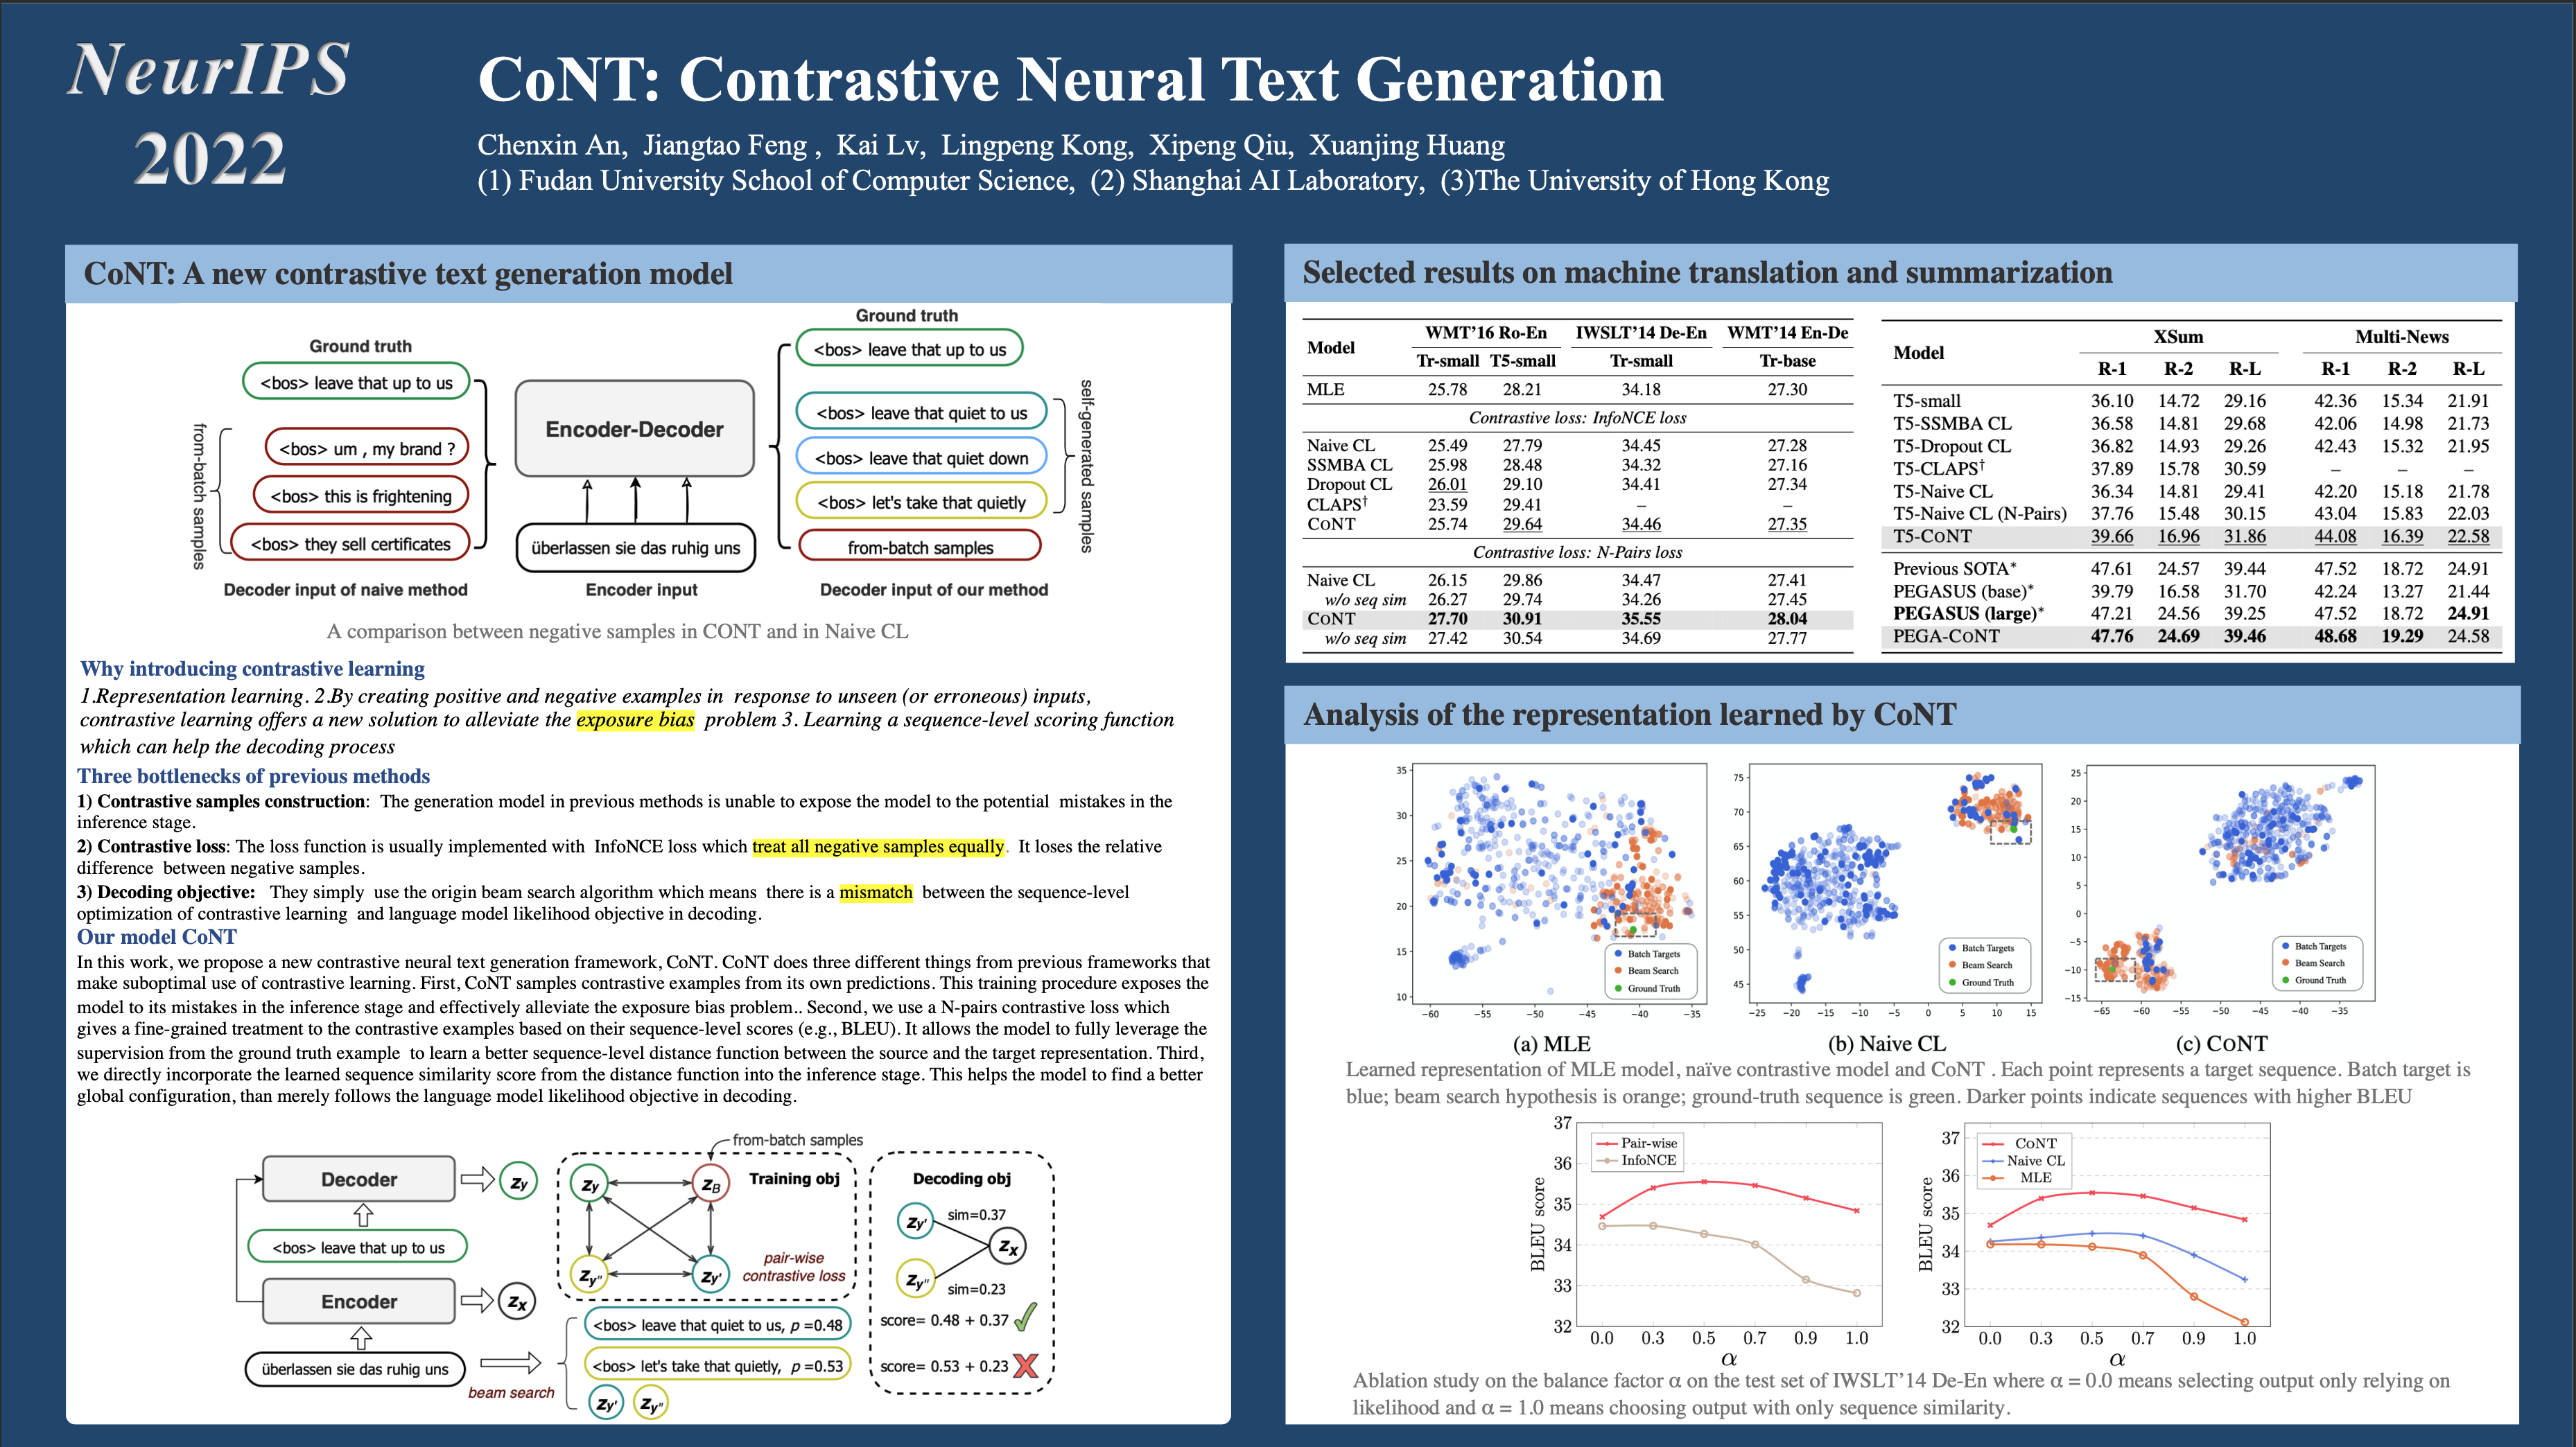 cont-contrastive-neural-text-generation-poster